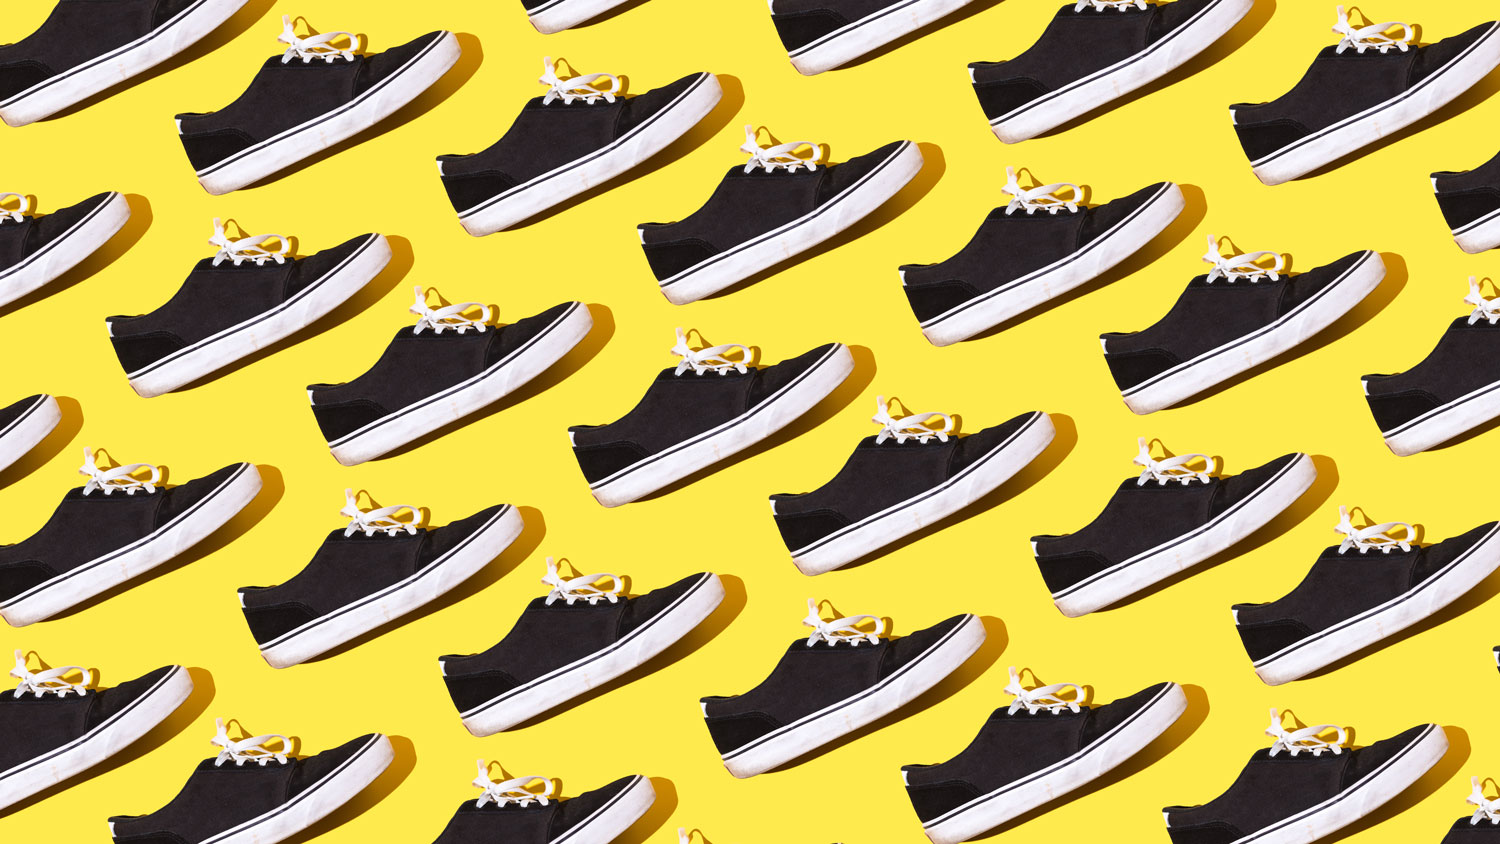 Pattern of black and white canvas and rubber surfer and skater sneakers with white laces, on a yellow background. Concept of skateboarding, surfing, fashion, sneakers, modern and retro.